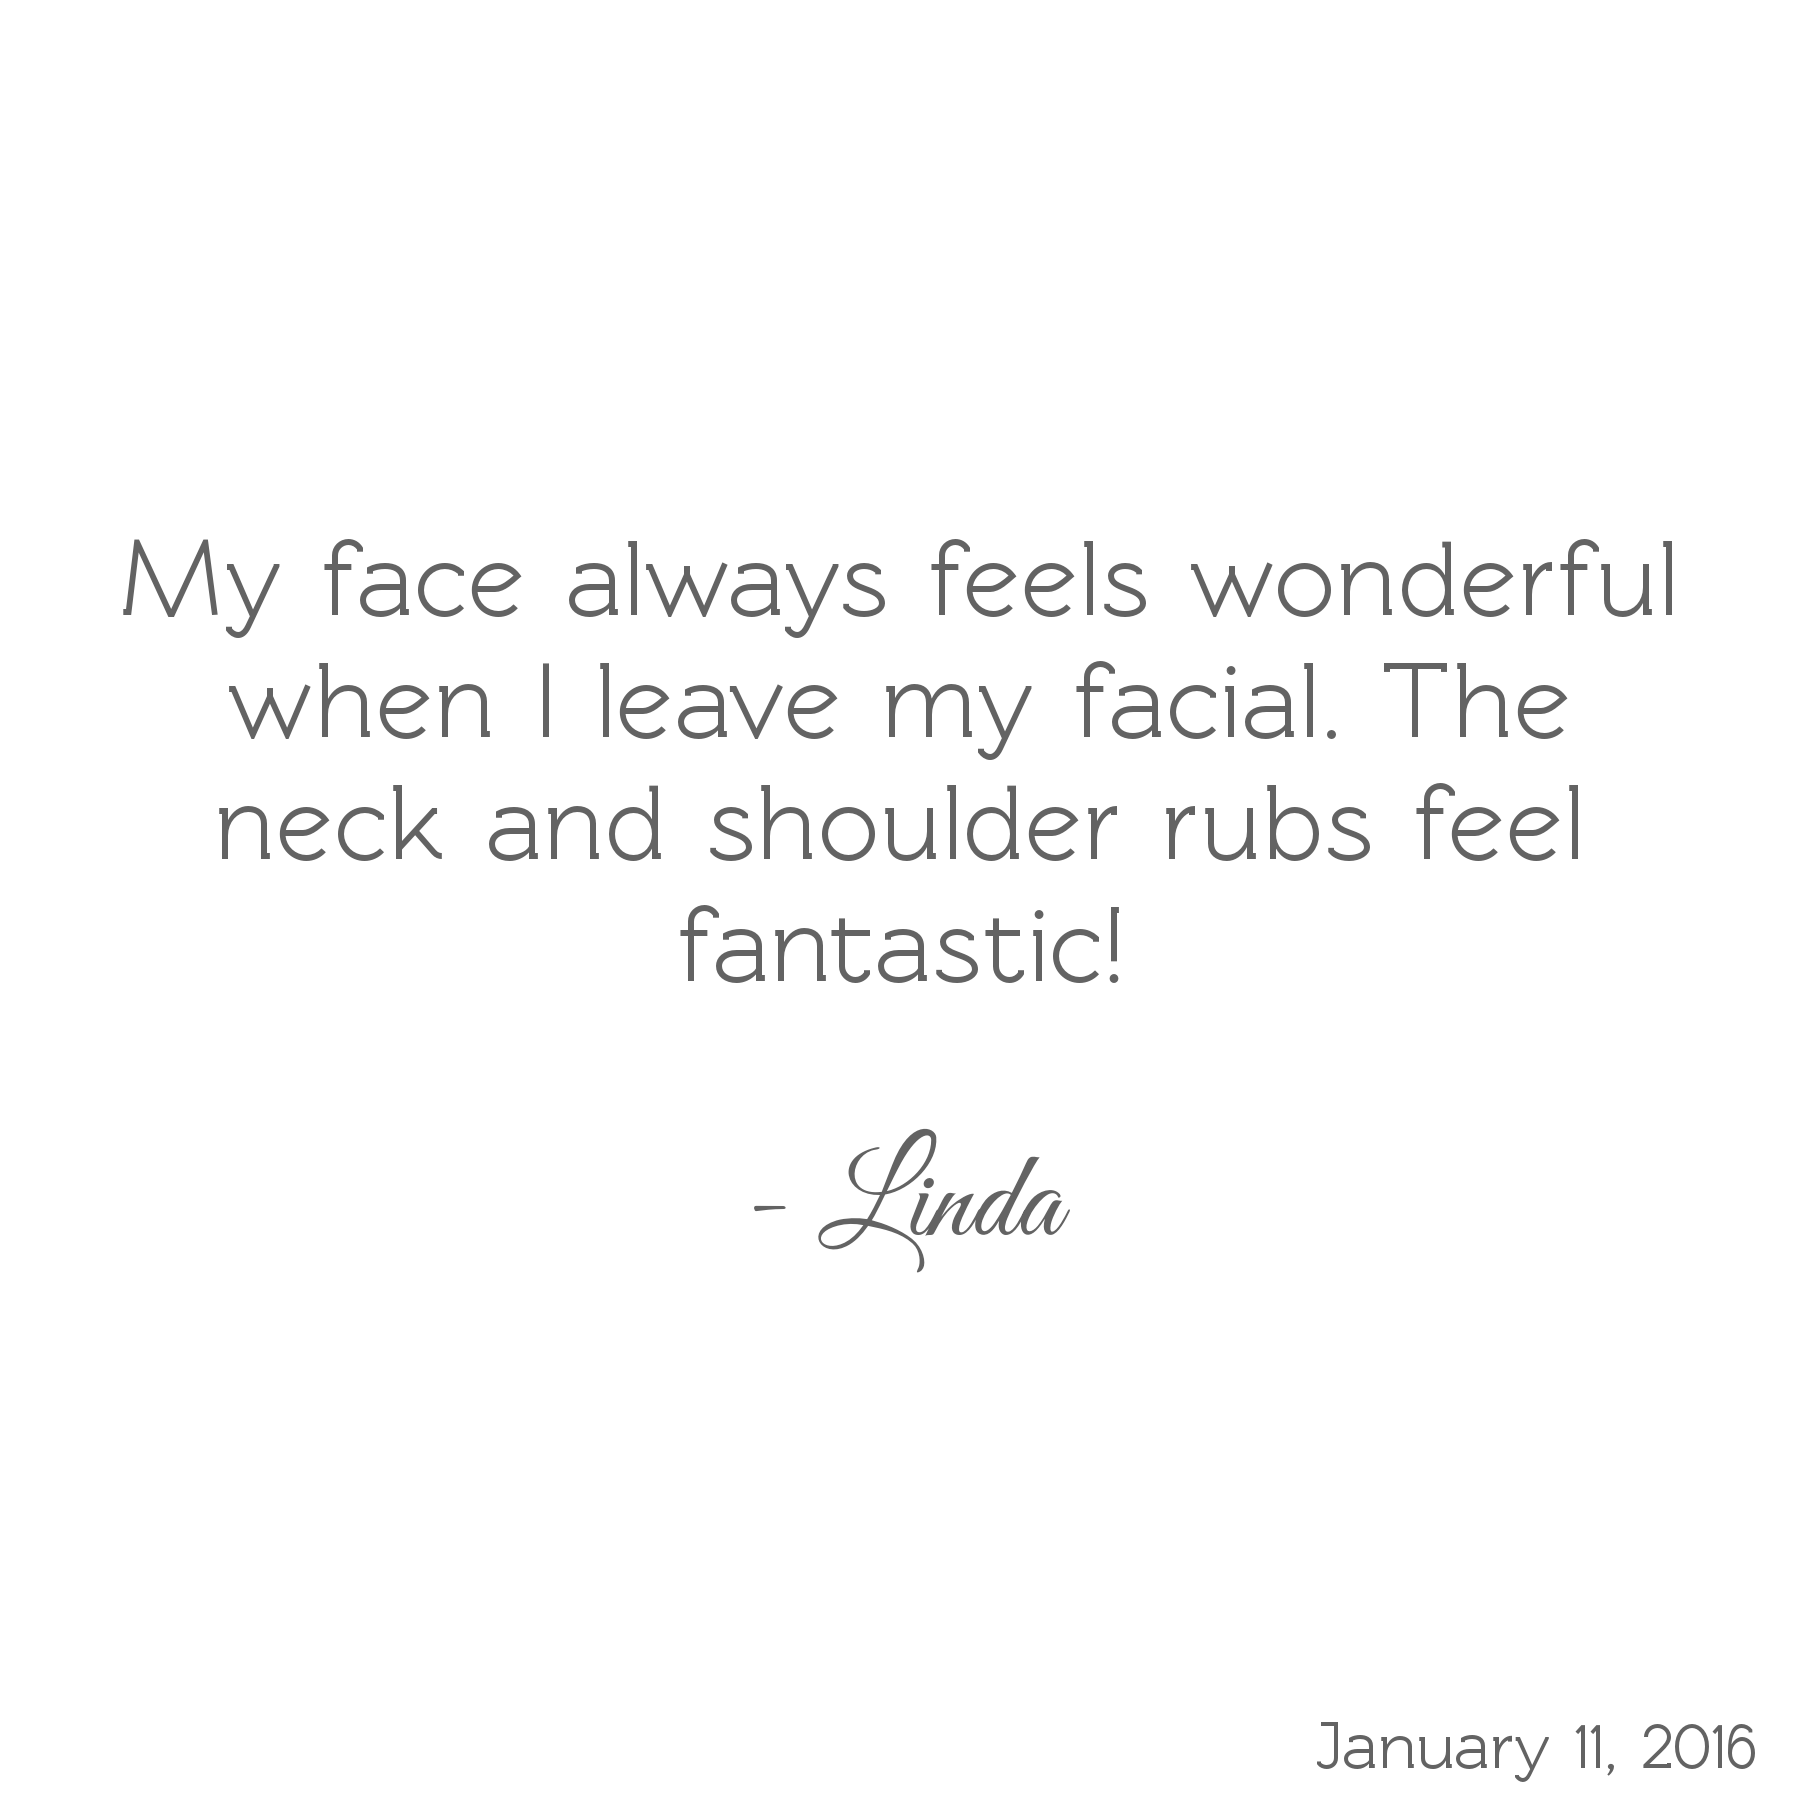 My face always feels wonderful when I leave my facial. The neck and shoulder rubs feel fantastic! -Linda